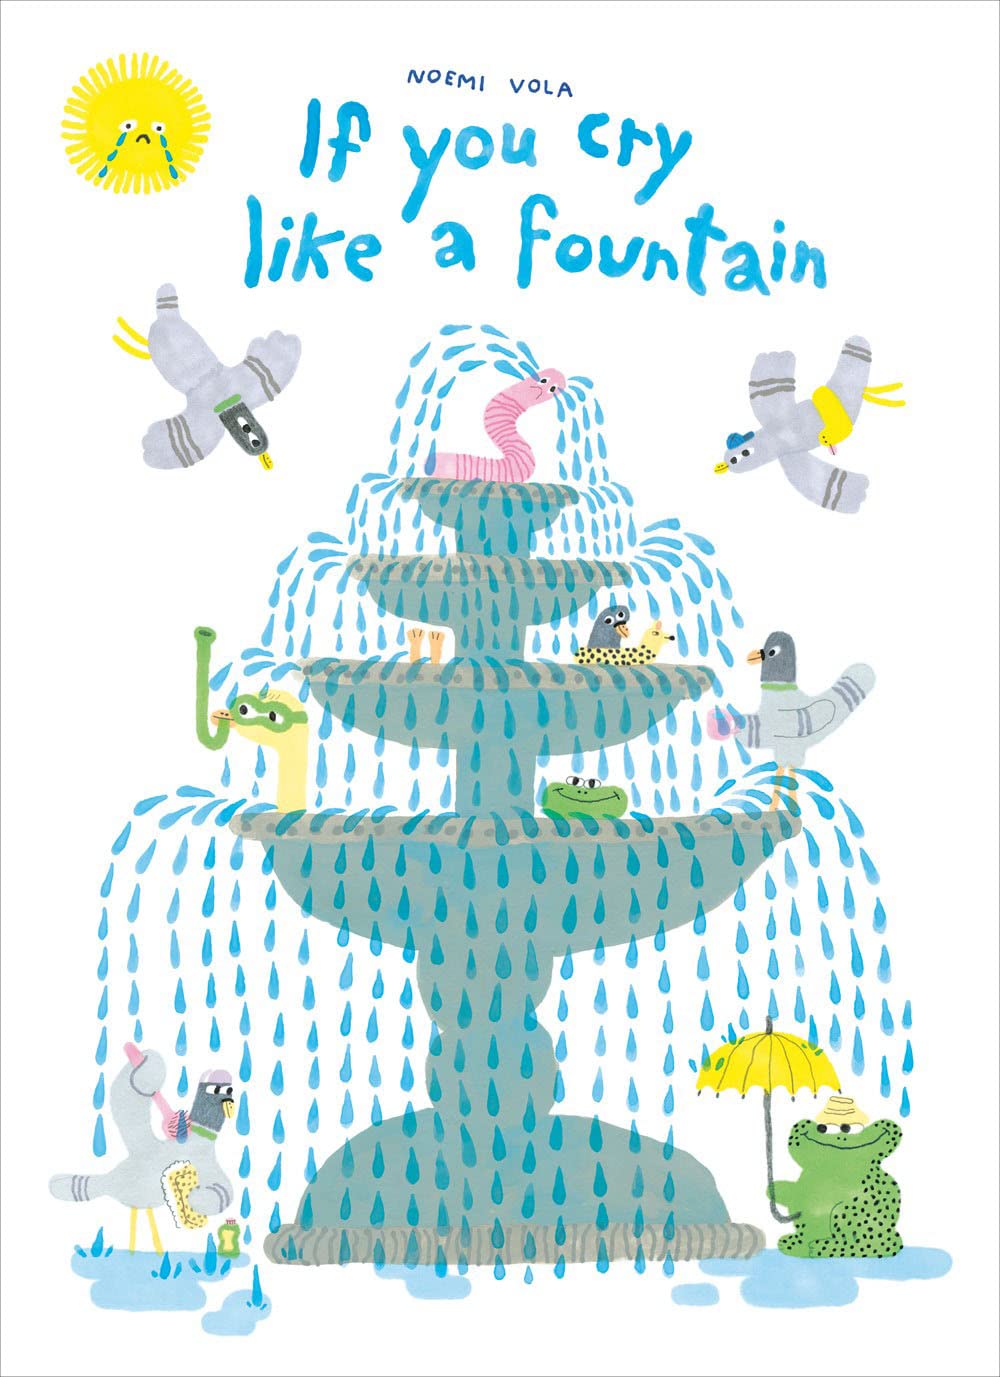 If You Cry Like a Fountain - Parkette.